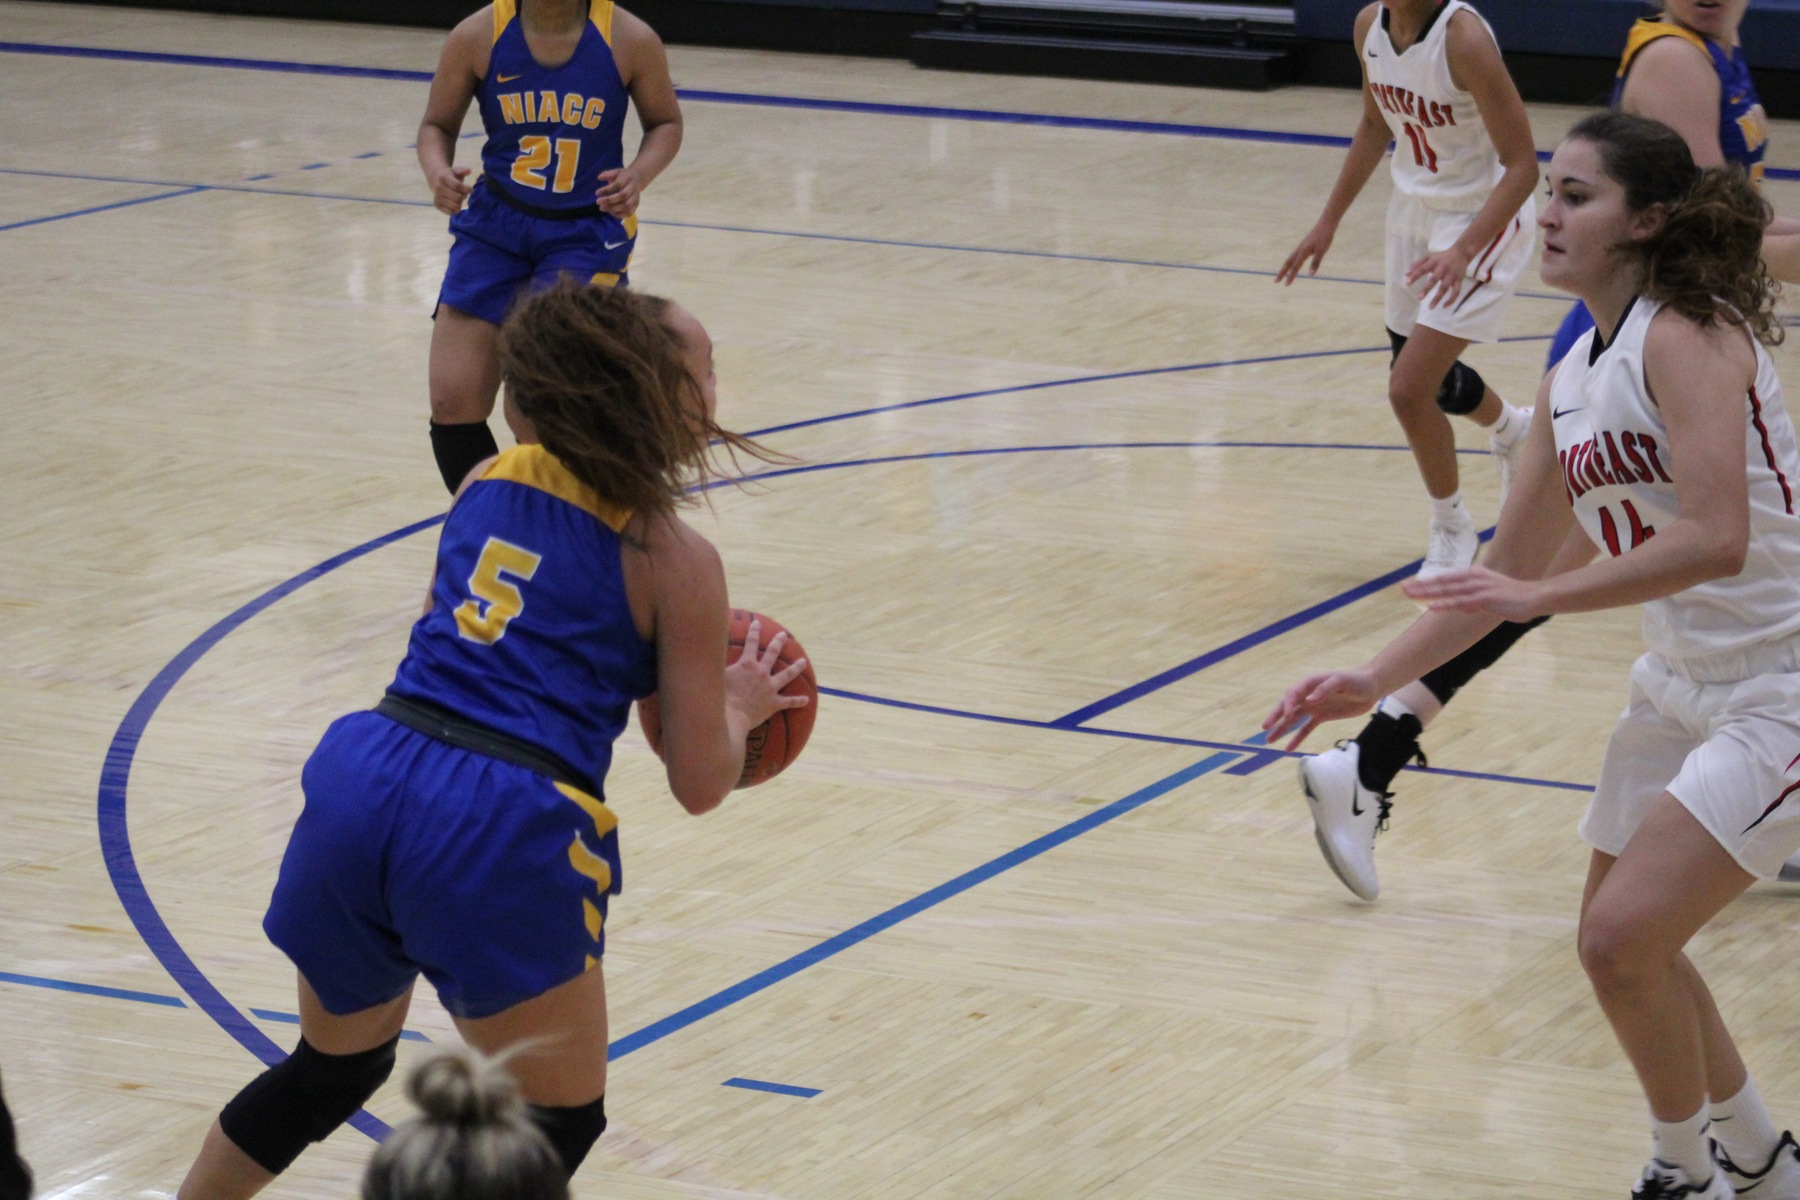 Kelcie Hale knocks down a three-point goal in the second half of Saturday's game against Northeast CC.